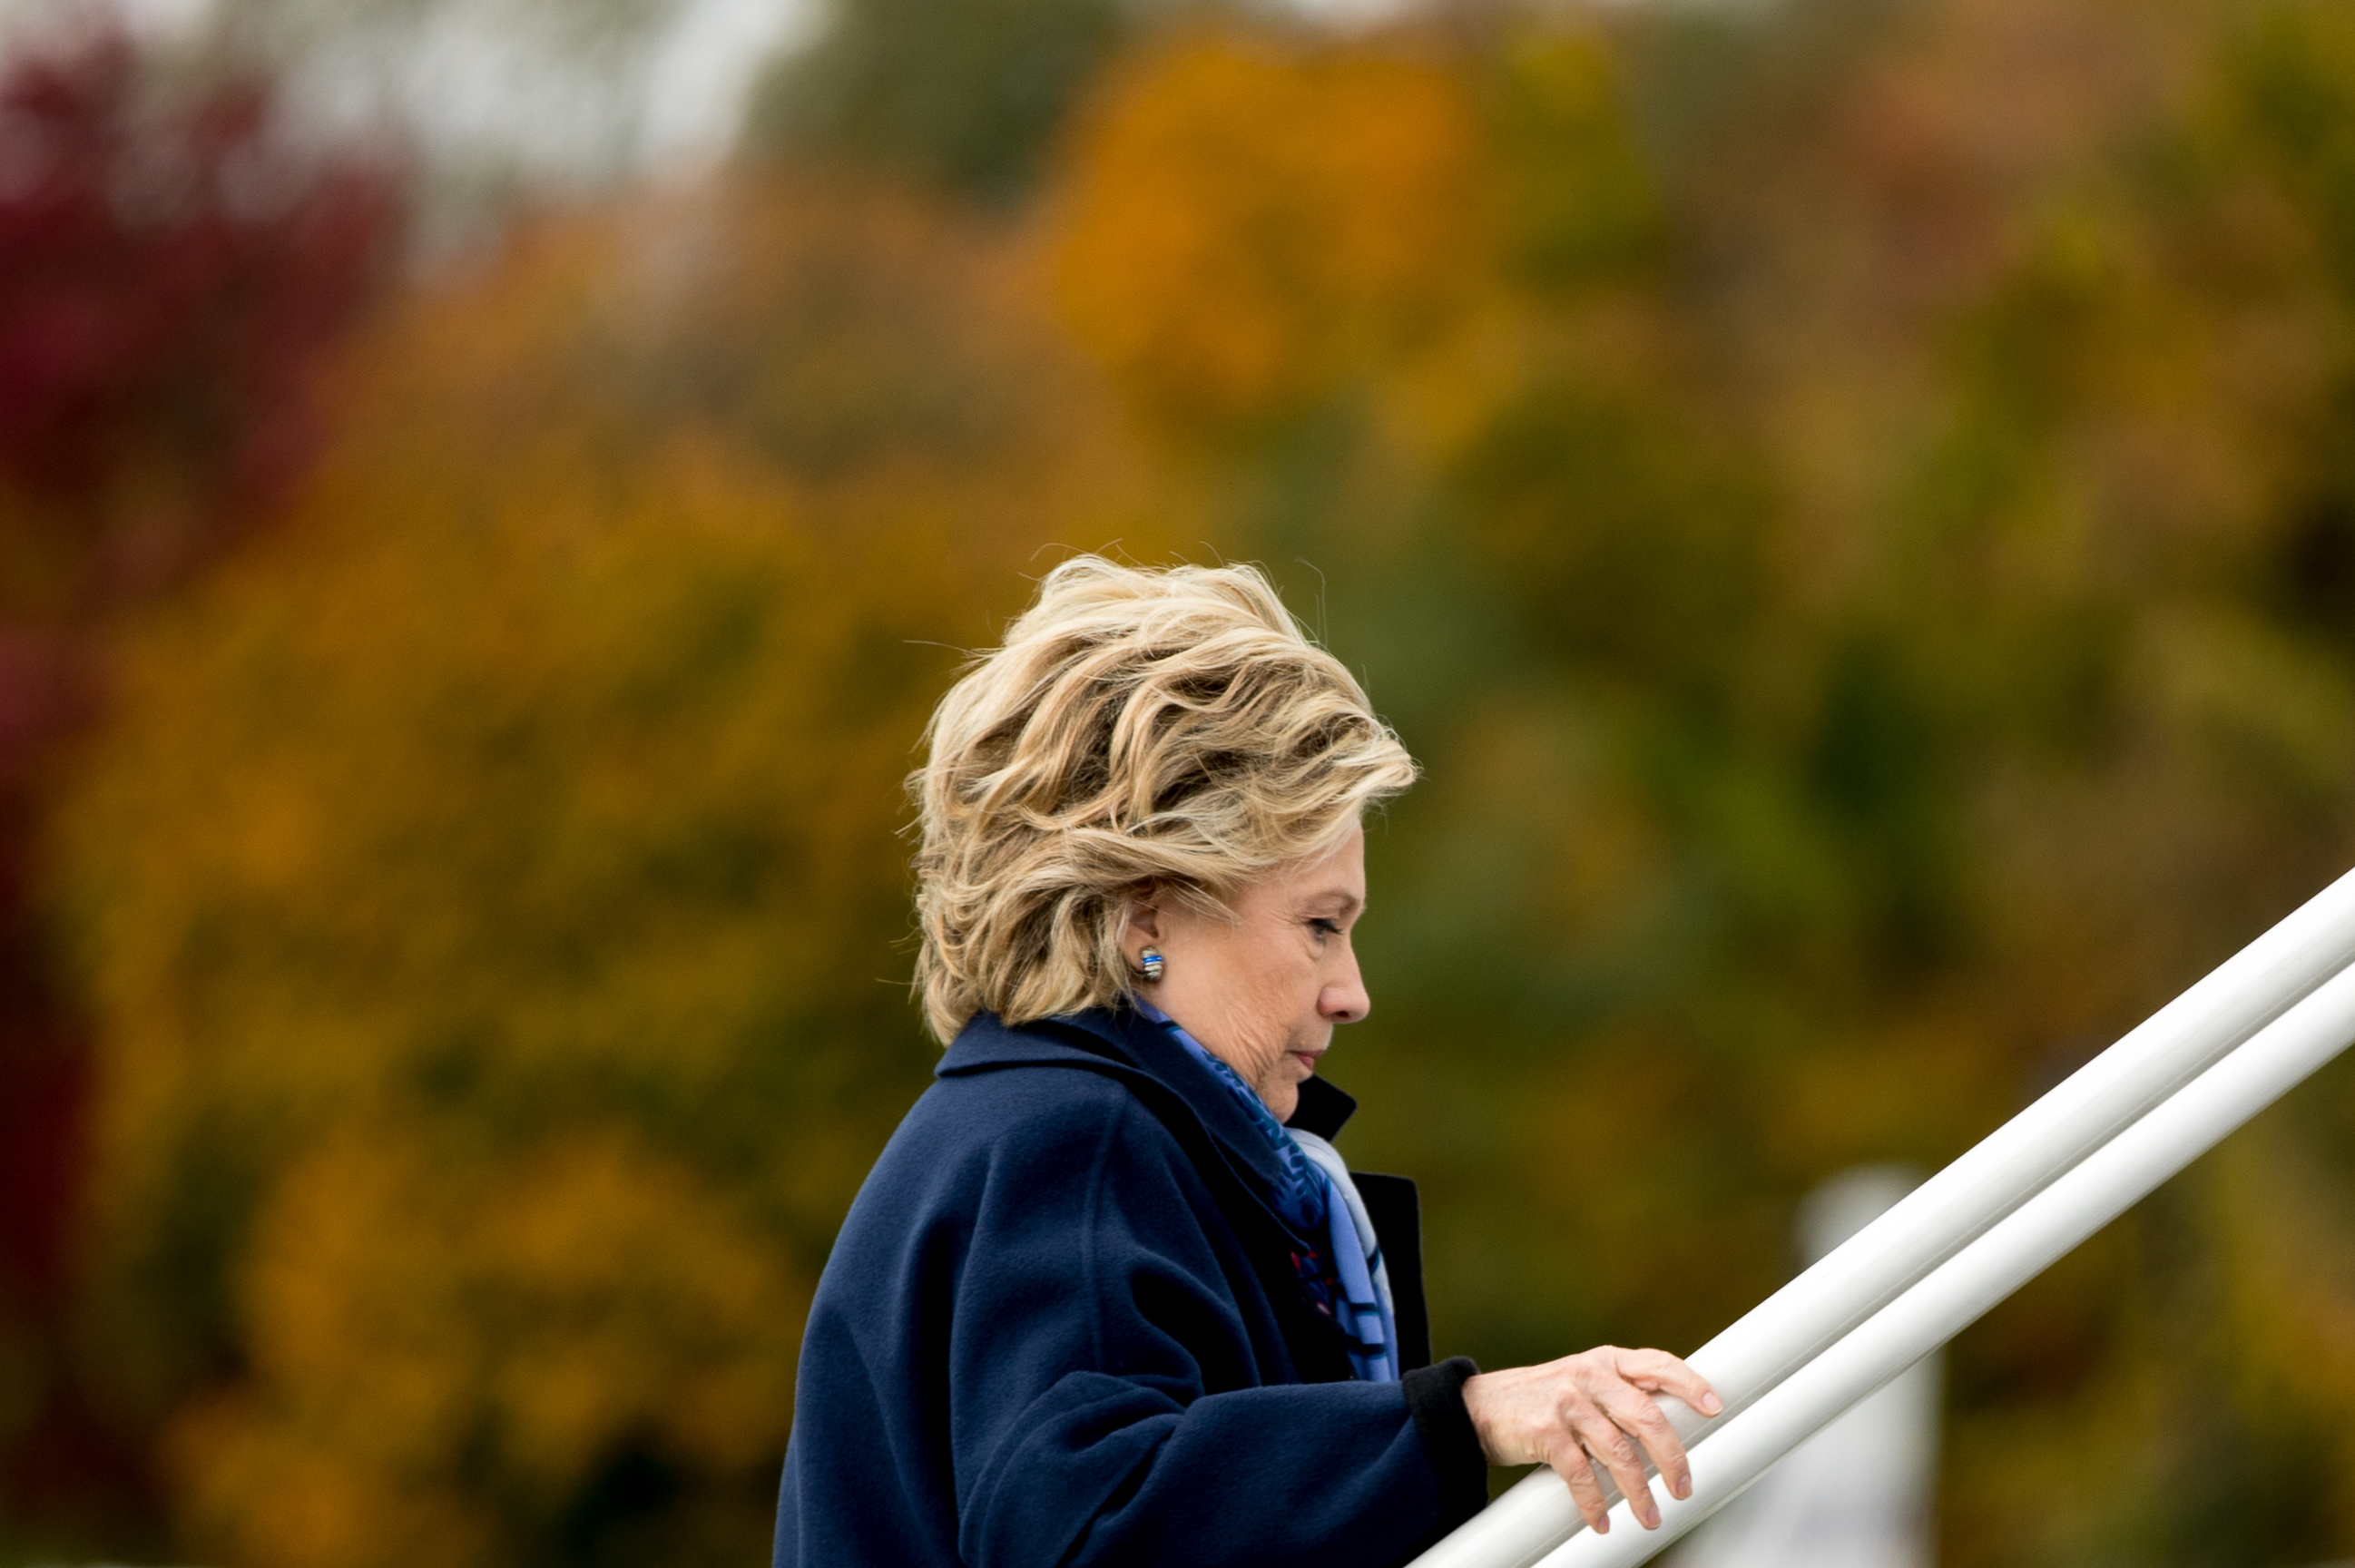 Hillary Clinton boards her campaign plane at Westchester County Airport in White Plains, N.Y., on Friday. The FBI said Friday it will be looking into newly discovered emails related to Clinton's private server